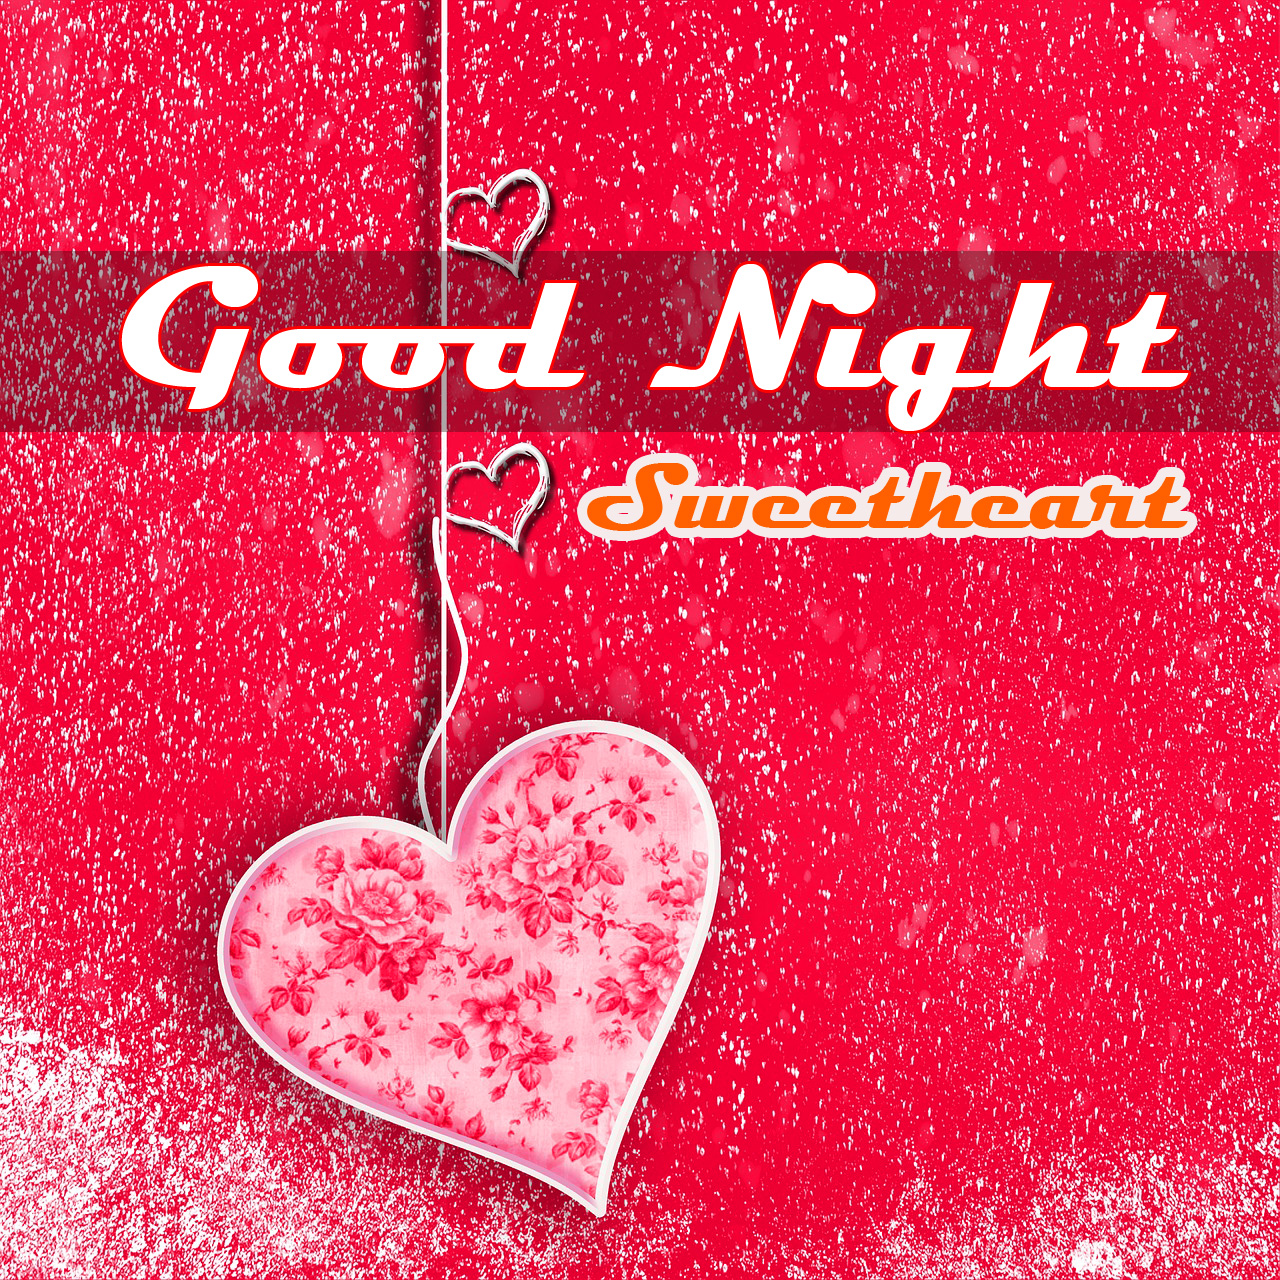 145+ Romantic Good Night Images Free HD Download